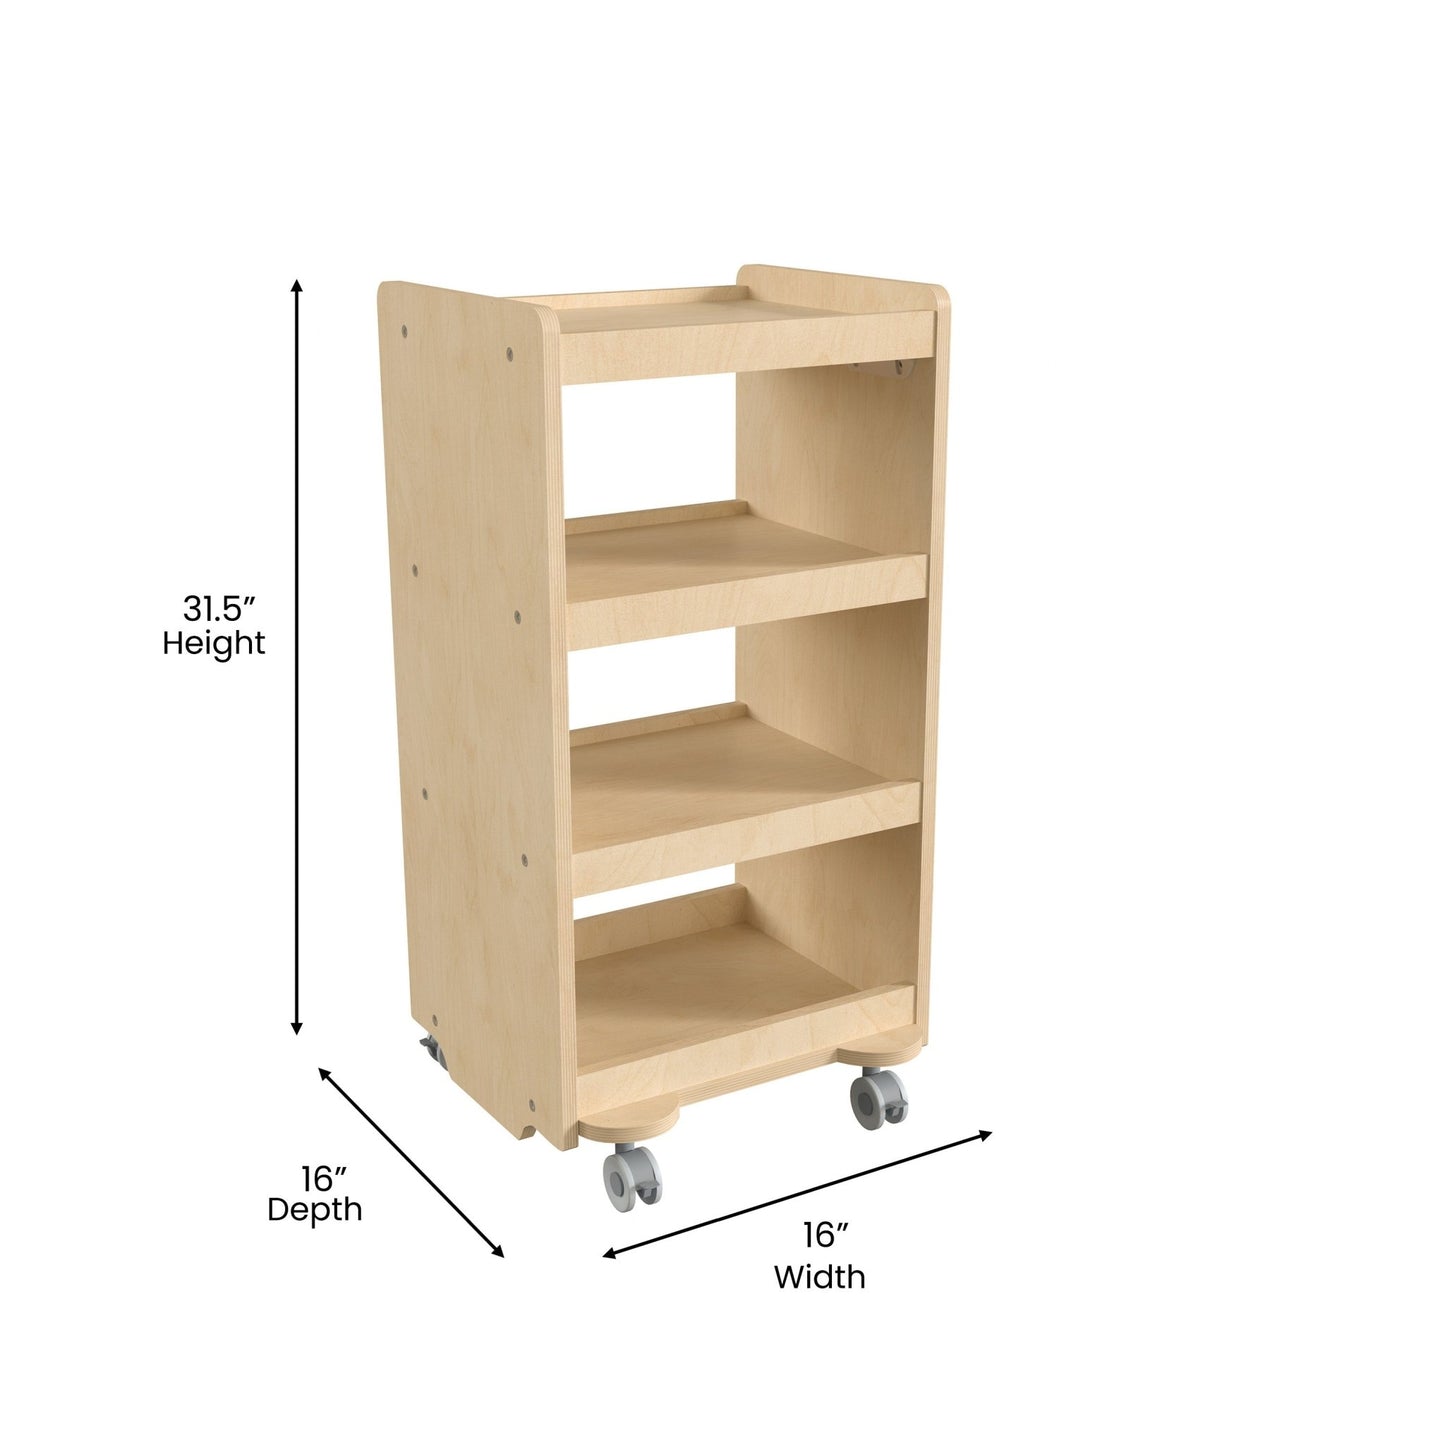 Bright Beginnings Commercial Wooden Mobile Storage Cart with 4 Storage Tiers and Locking Caster Wheels, Natural - SchoolOutlet